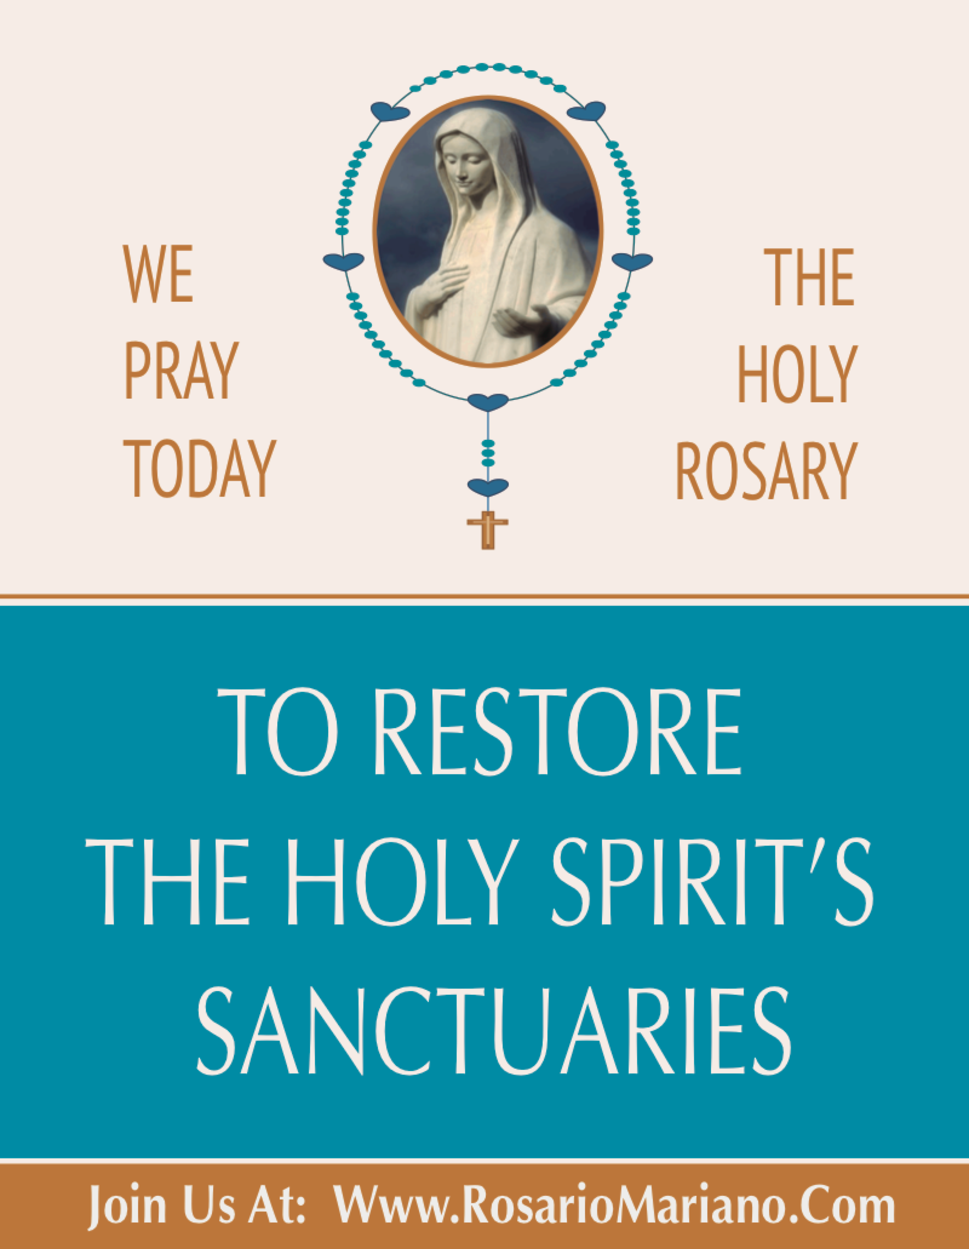 WE PRAY TODAY THE HOLY ROSARY TO RESTORE THE HOLY SPIRIT' SANCTUARIES